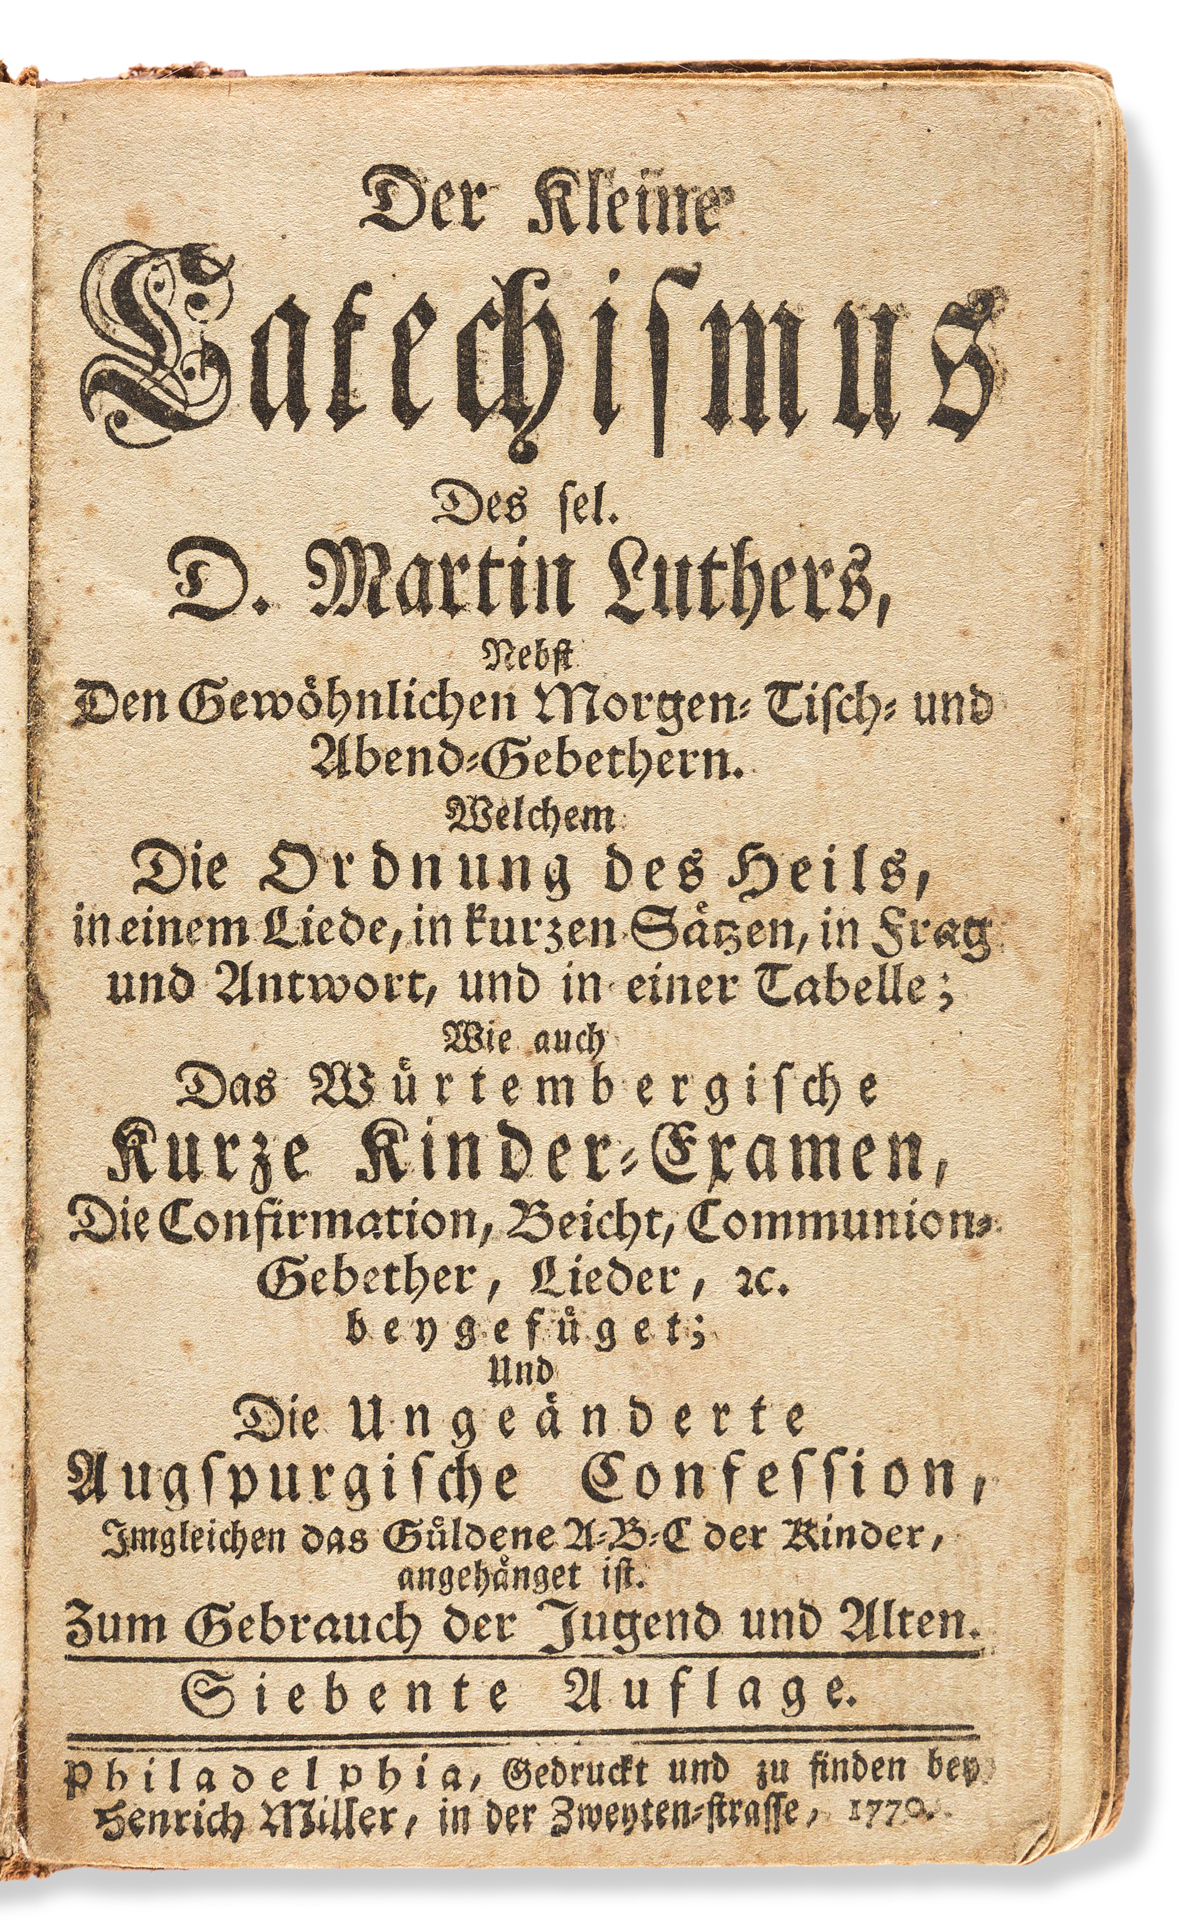 (EARLY AMERICAN IMPRINT.) Der Kleine Catechismus des sel. D. Martin Luthers.